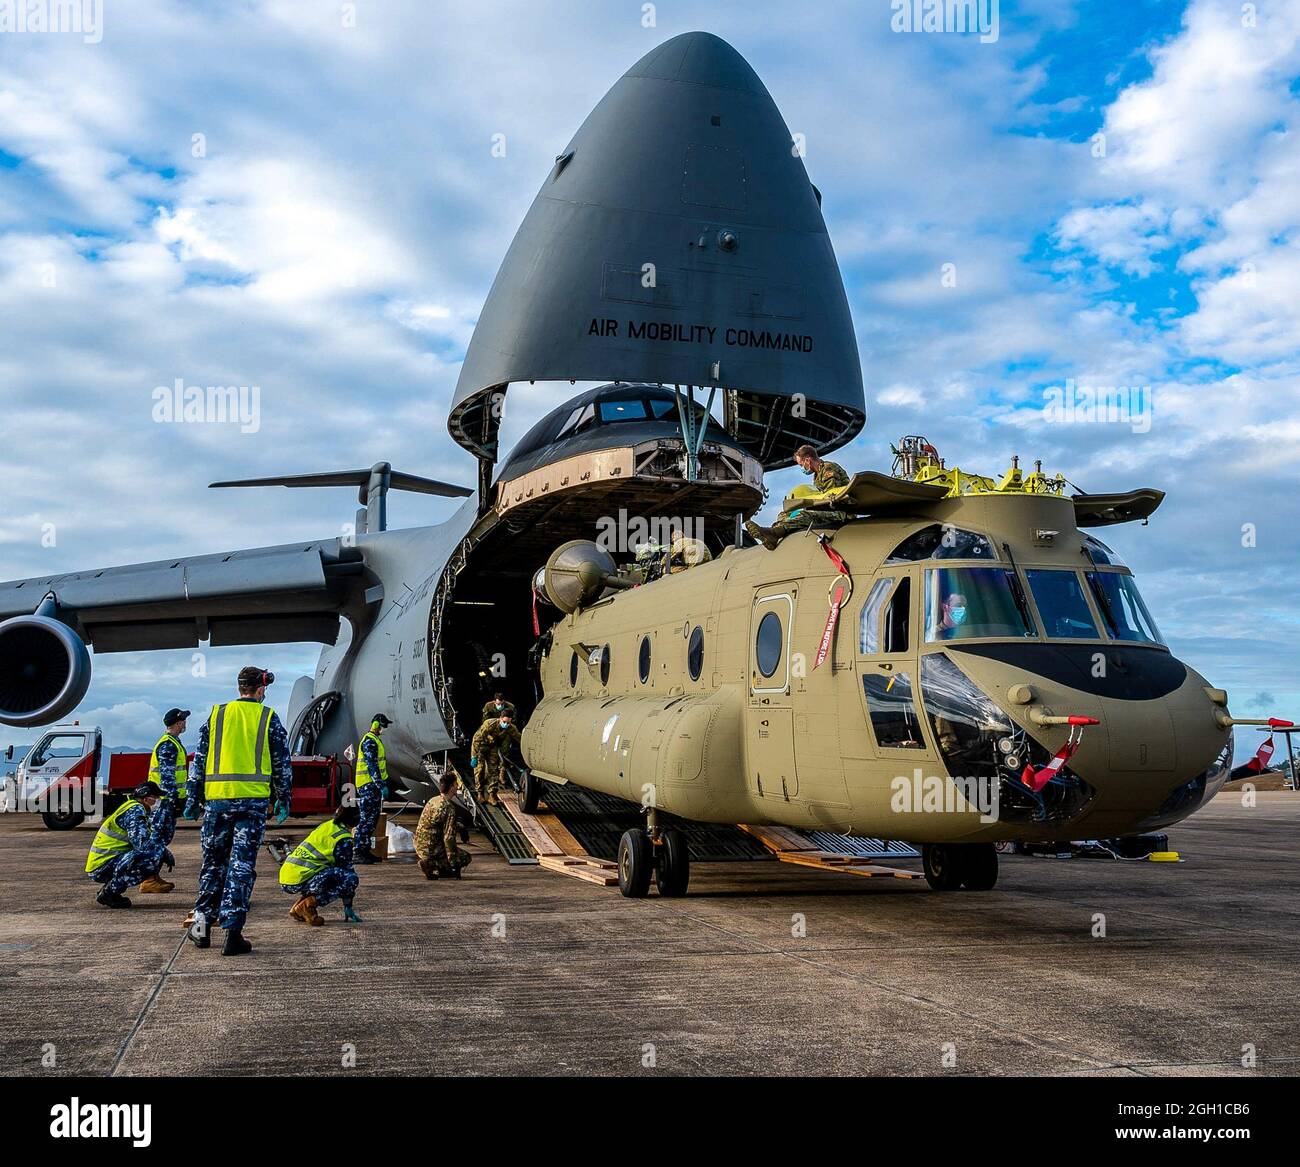 436th Airlift Wing, 9th Airlift Squadron, Air Mobility Command, Boeing Defence Australia, C-5M Super Galaxy, CH-47F Chinook, CH-47F, Chinook, Stock Photo